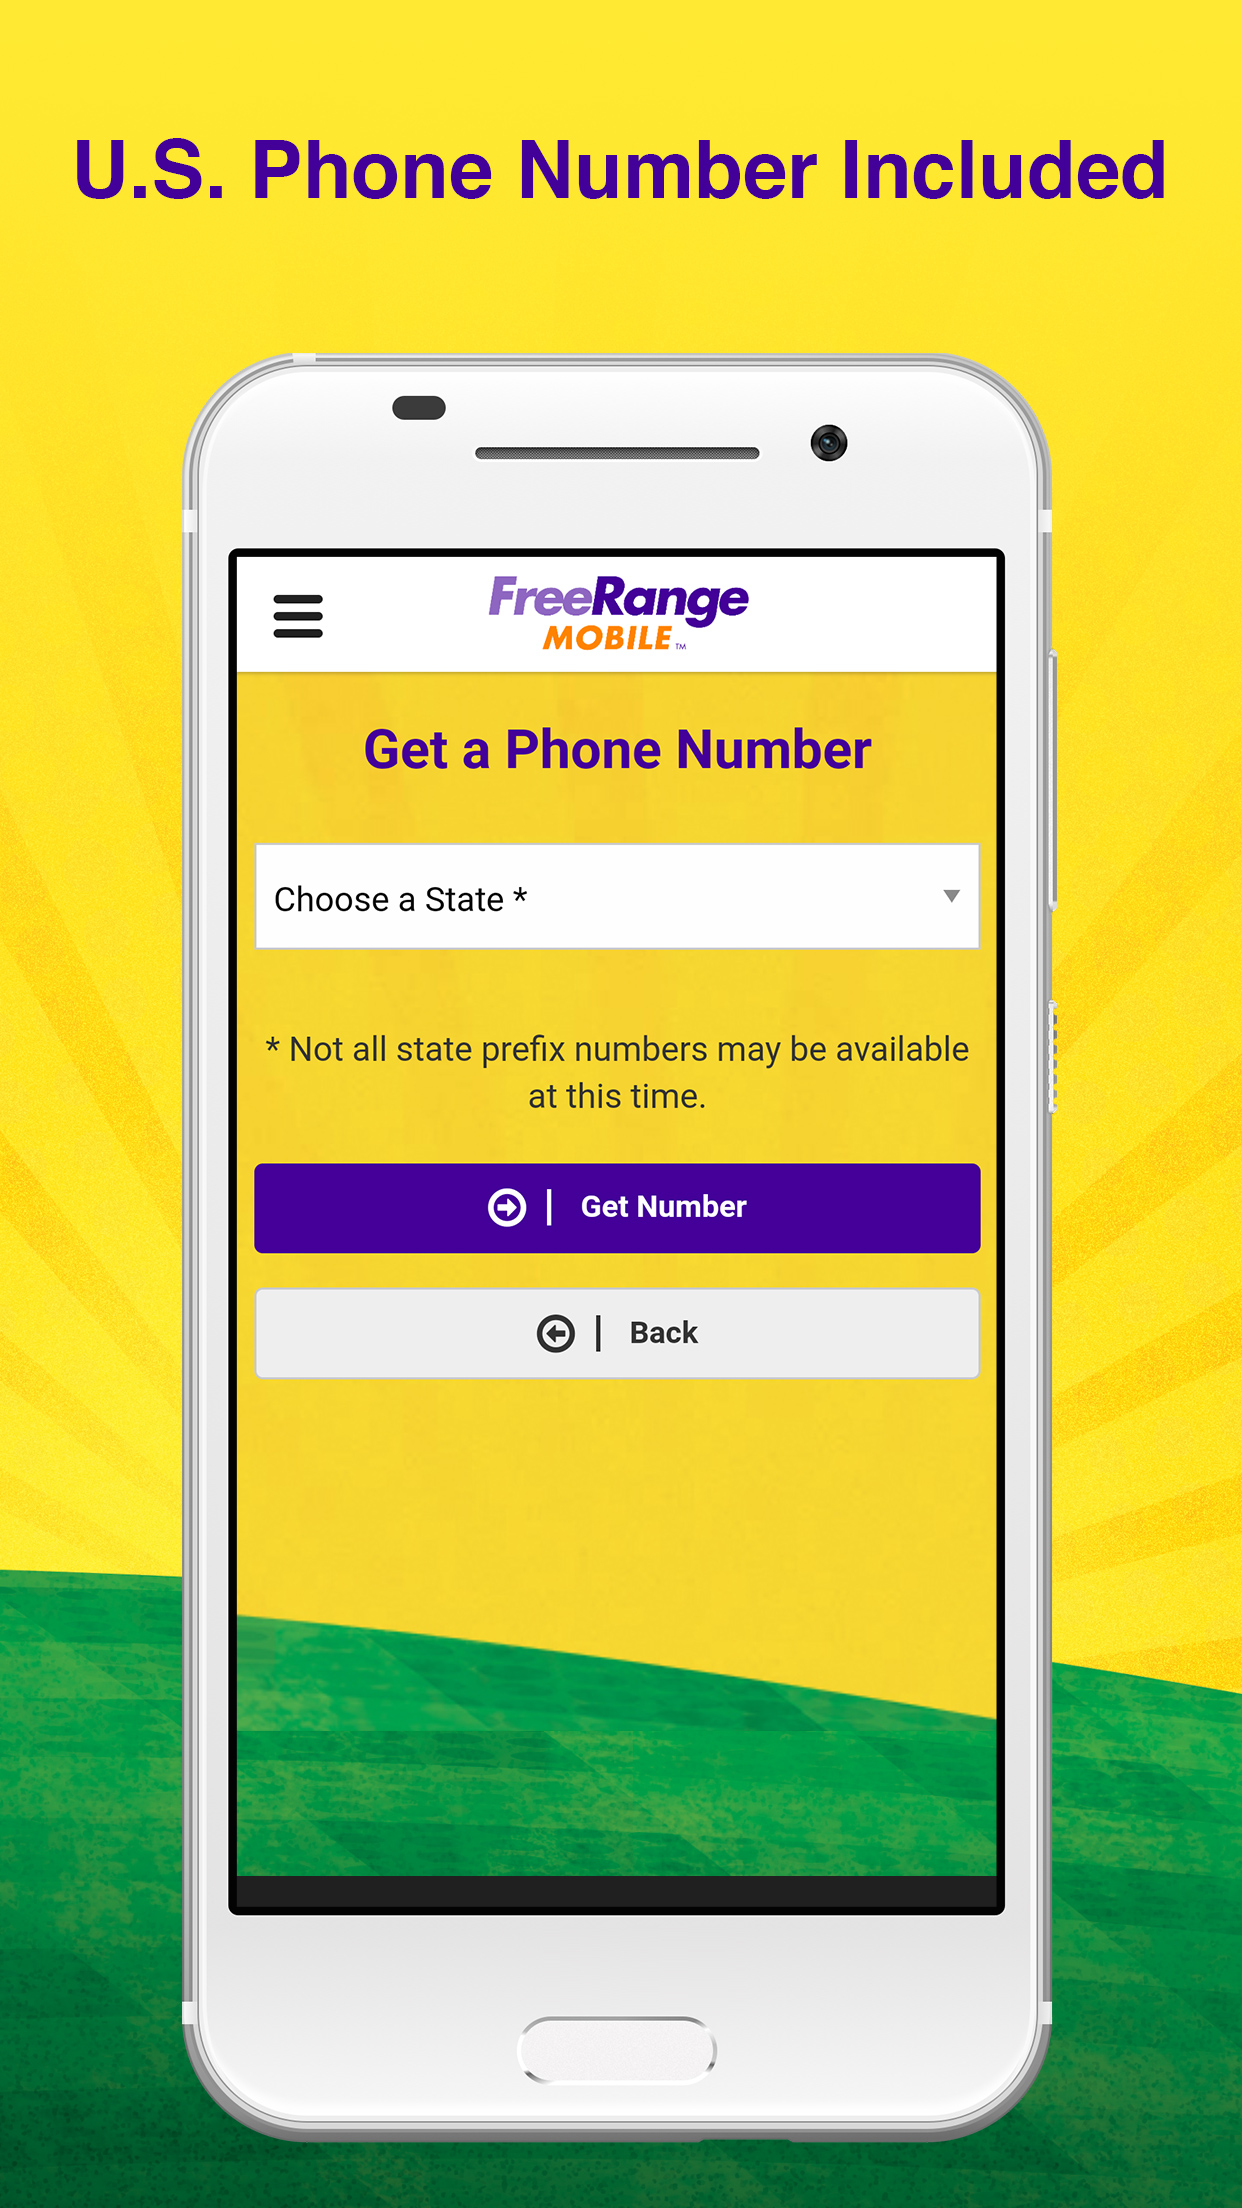 FreeRange Mobile - Unlimited Call & Text Made Easy